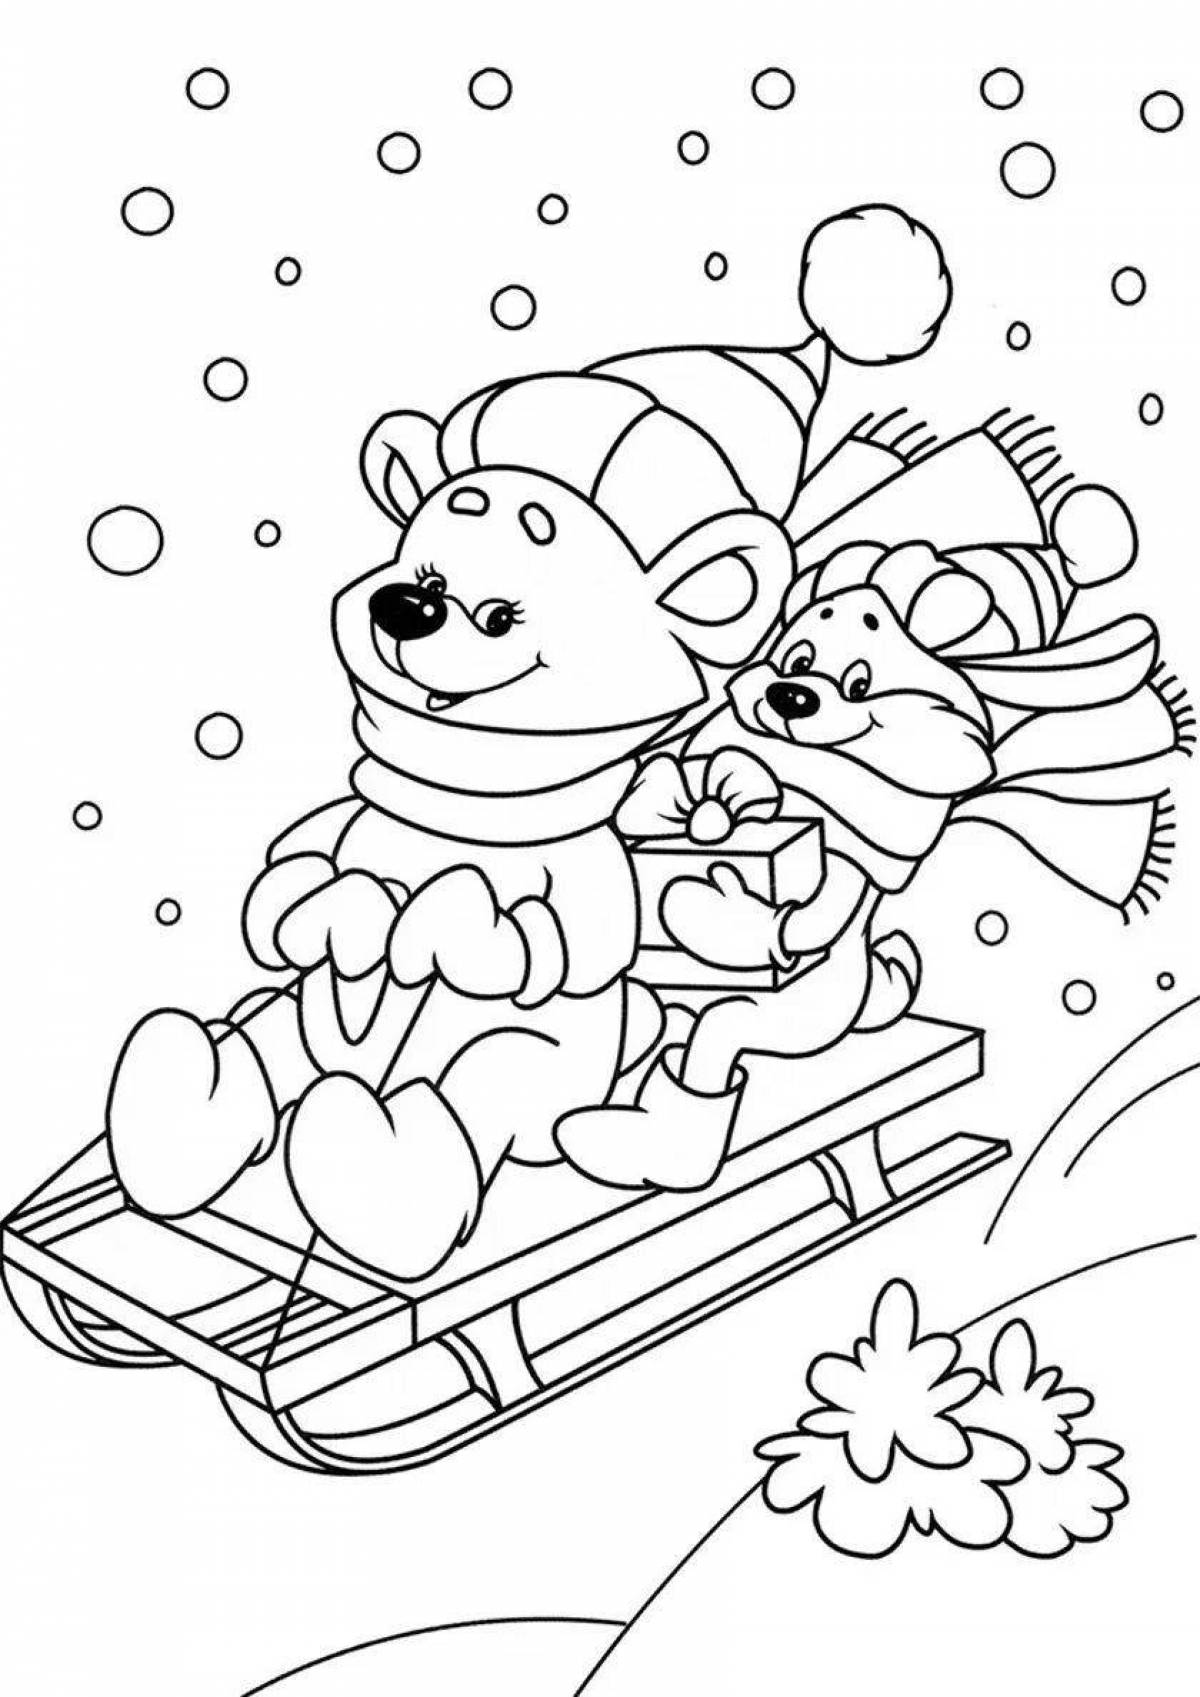 Furry winter coloring book